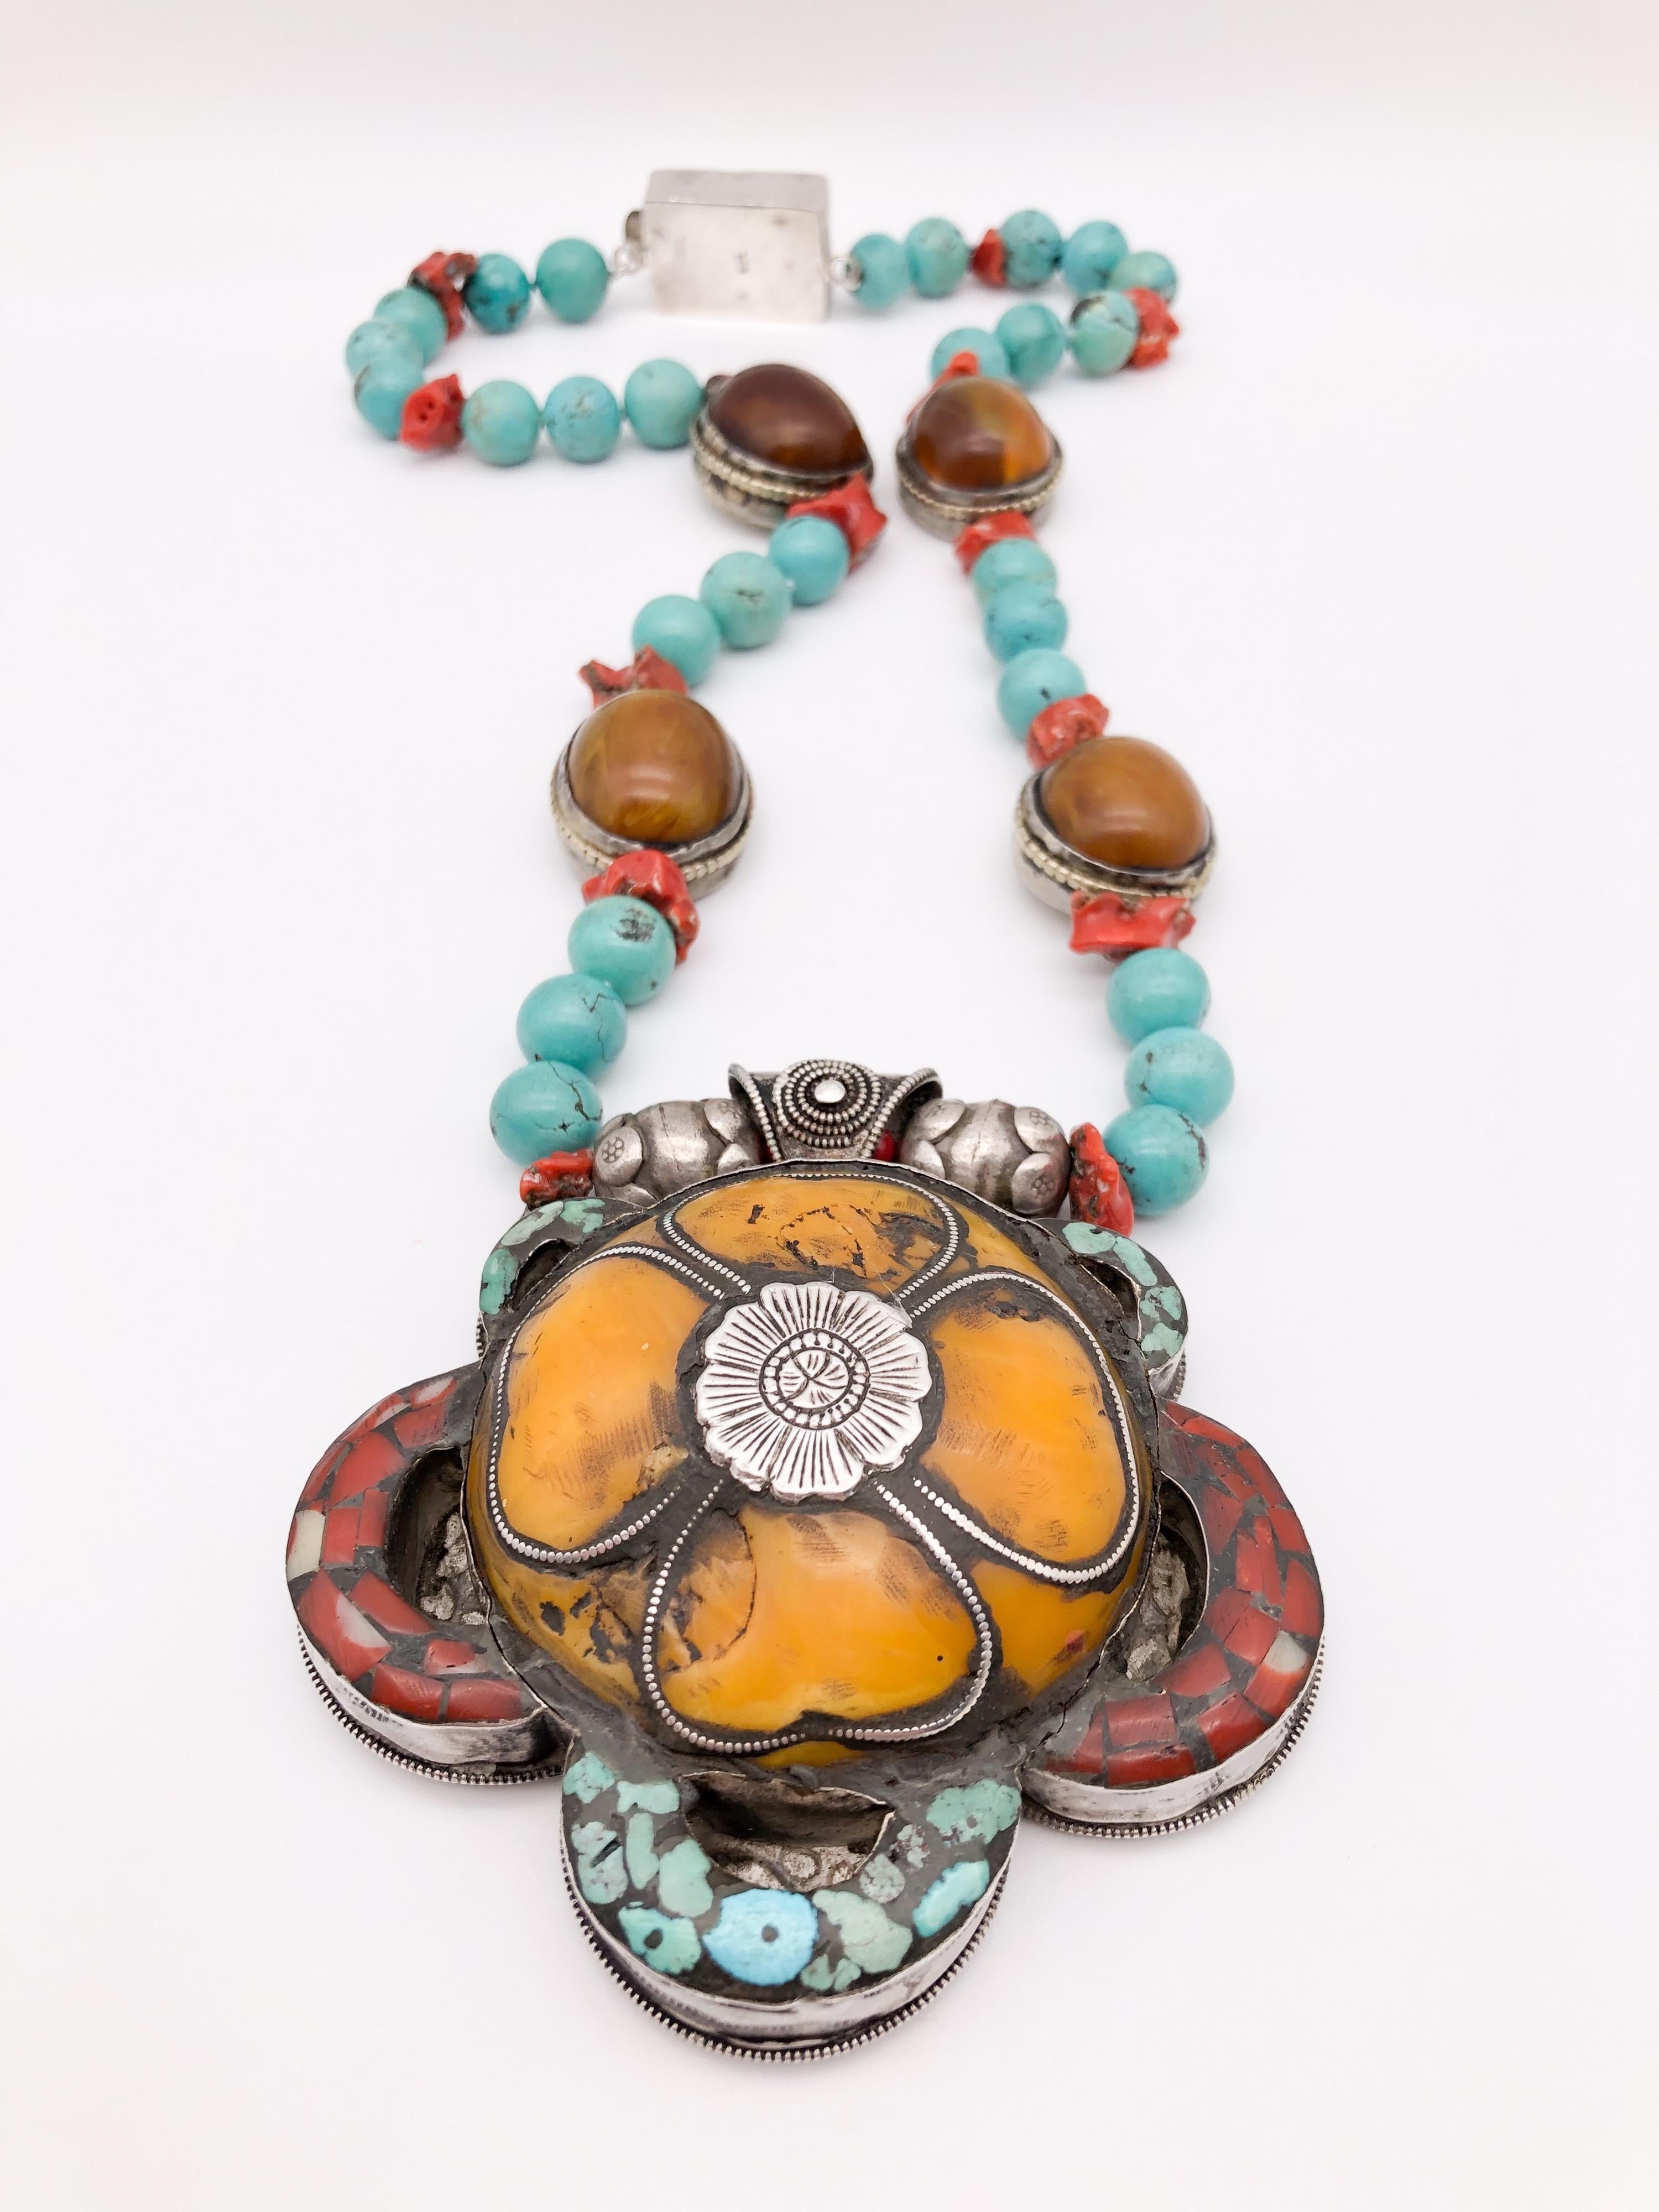 Contemporary A.jeschel Statement and Unique Lotus Flower Tibetan Pendant Amber and Turquoise. For Sale